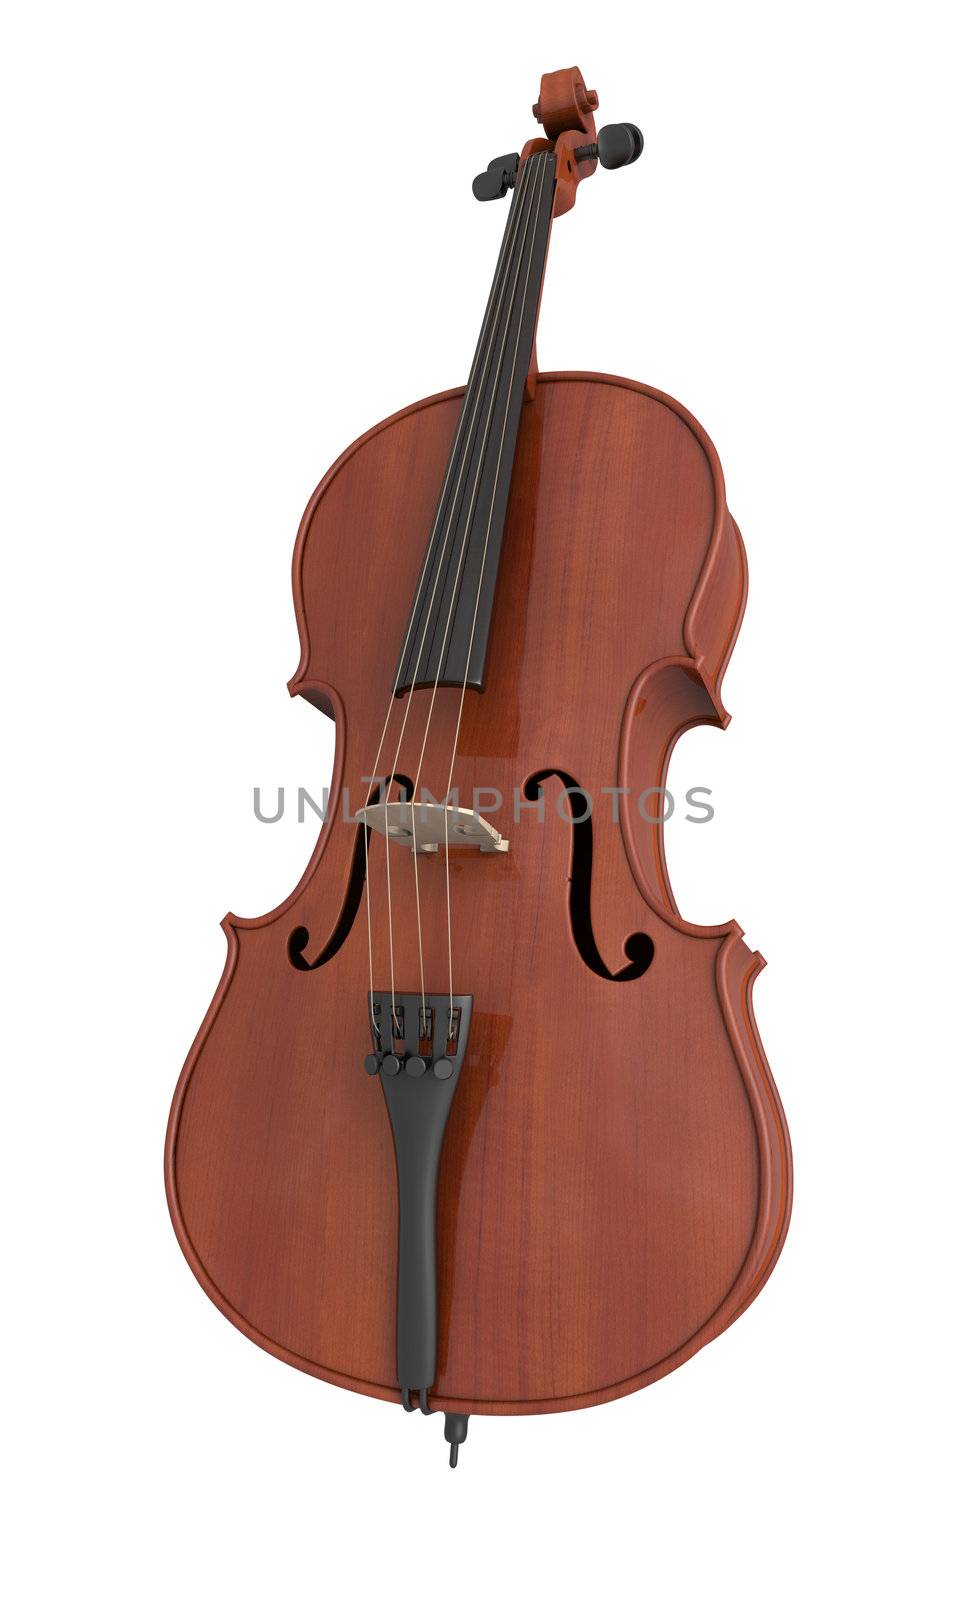 3D rendered cello on white background.